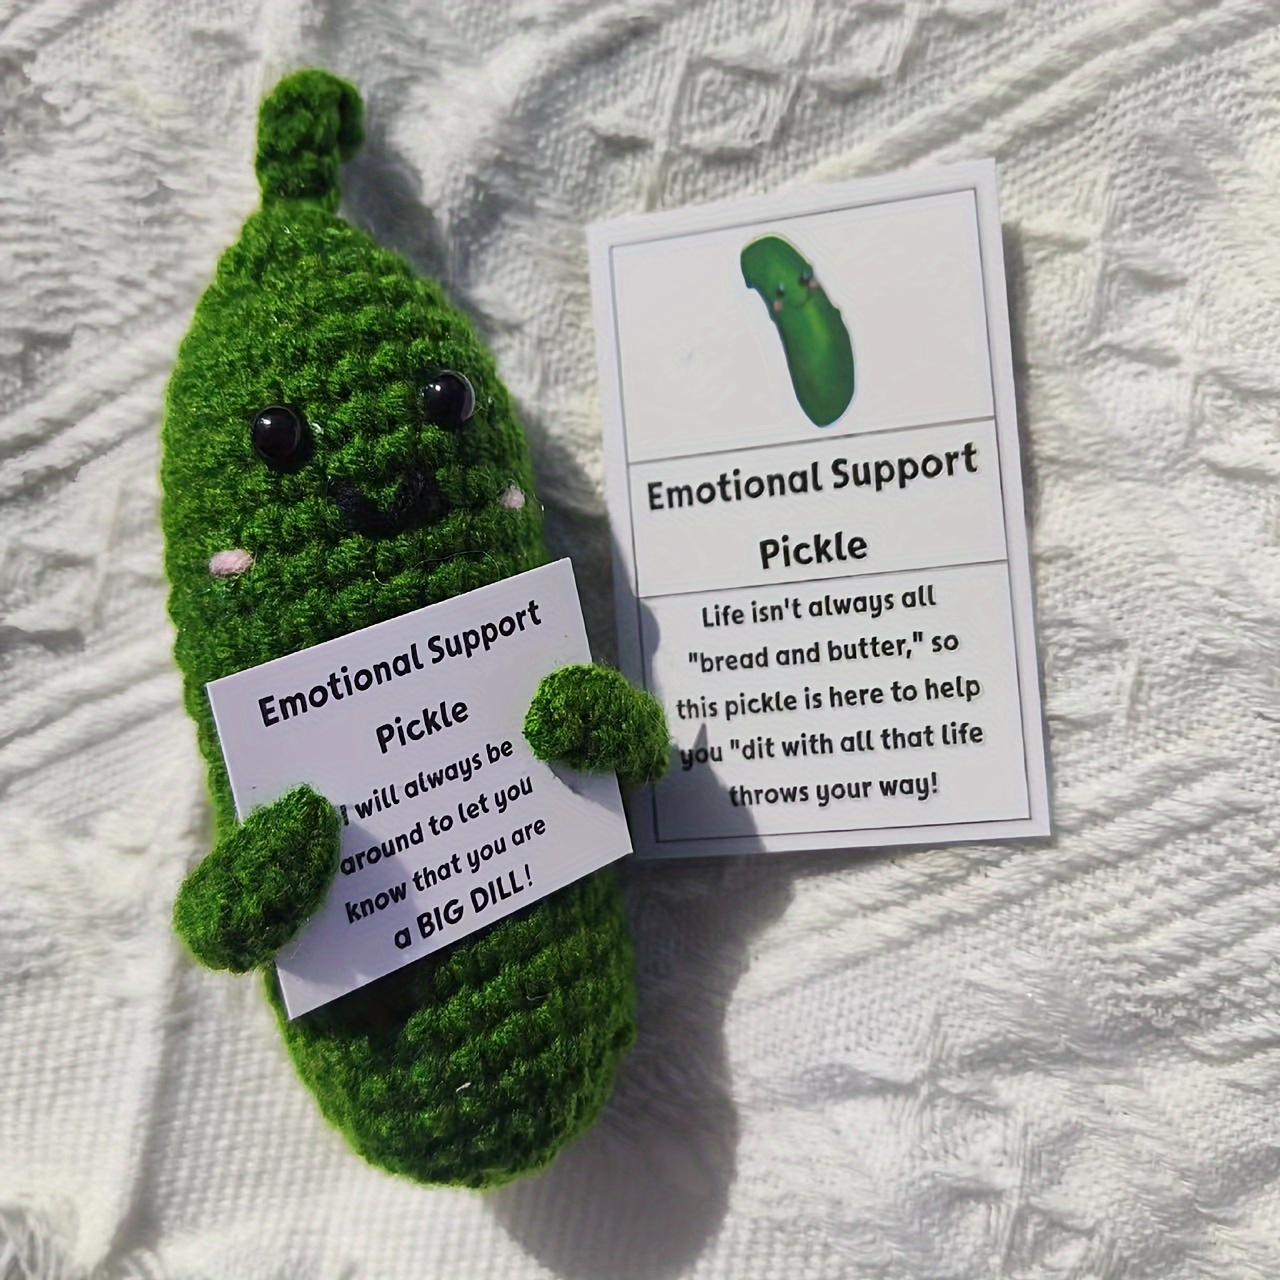 

1 Set, Handmade Emotional Support Cucumber Gift, Handmade Crochet Emotional Support Cute Crochet Cucumber Knitted Doll, Christmas Decoration Gift, New Year Gift, Valentine's Day Gift